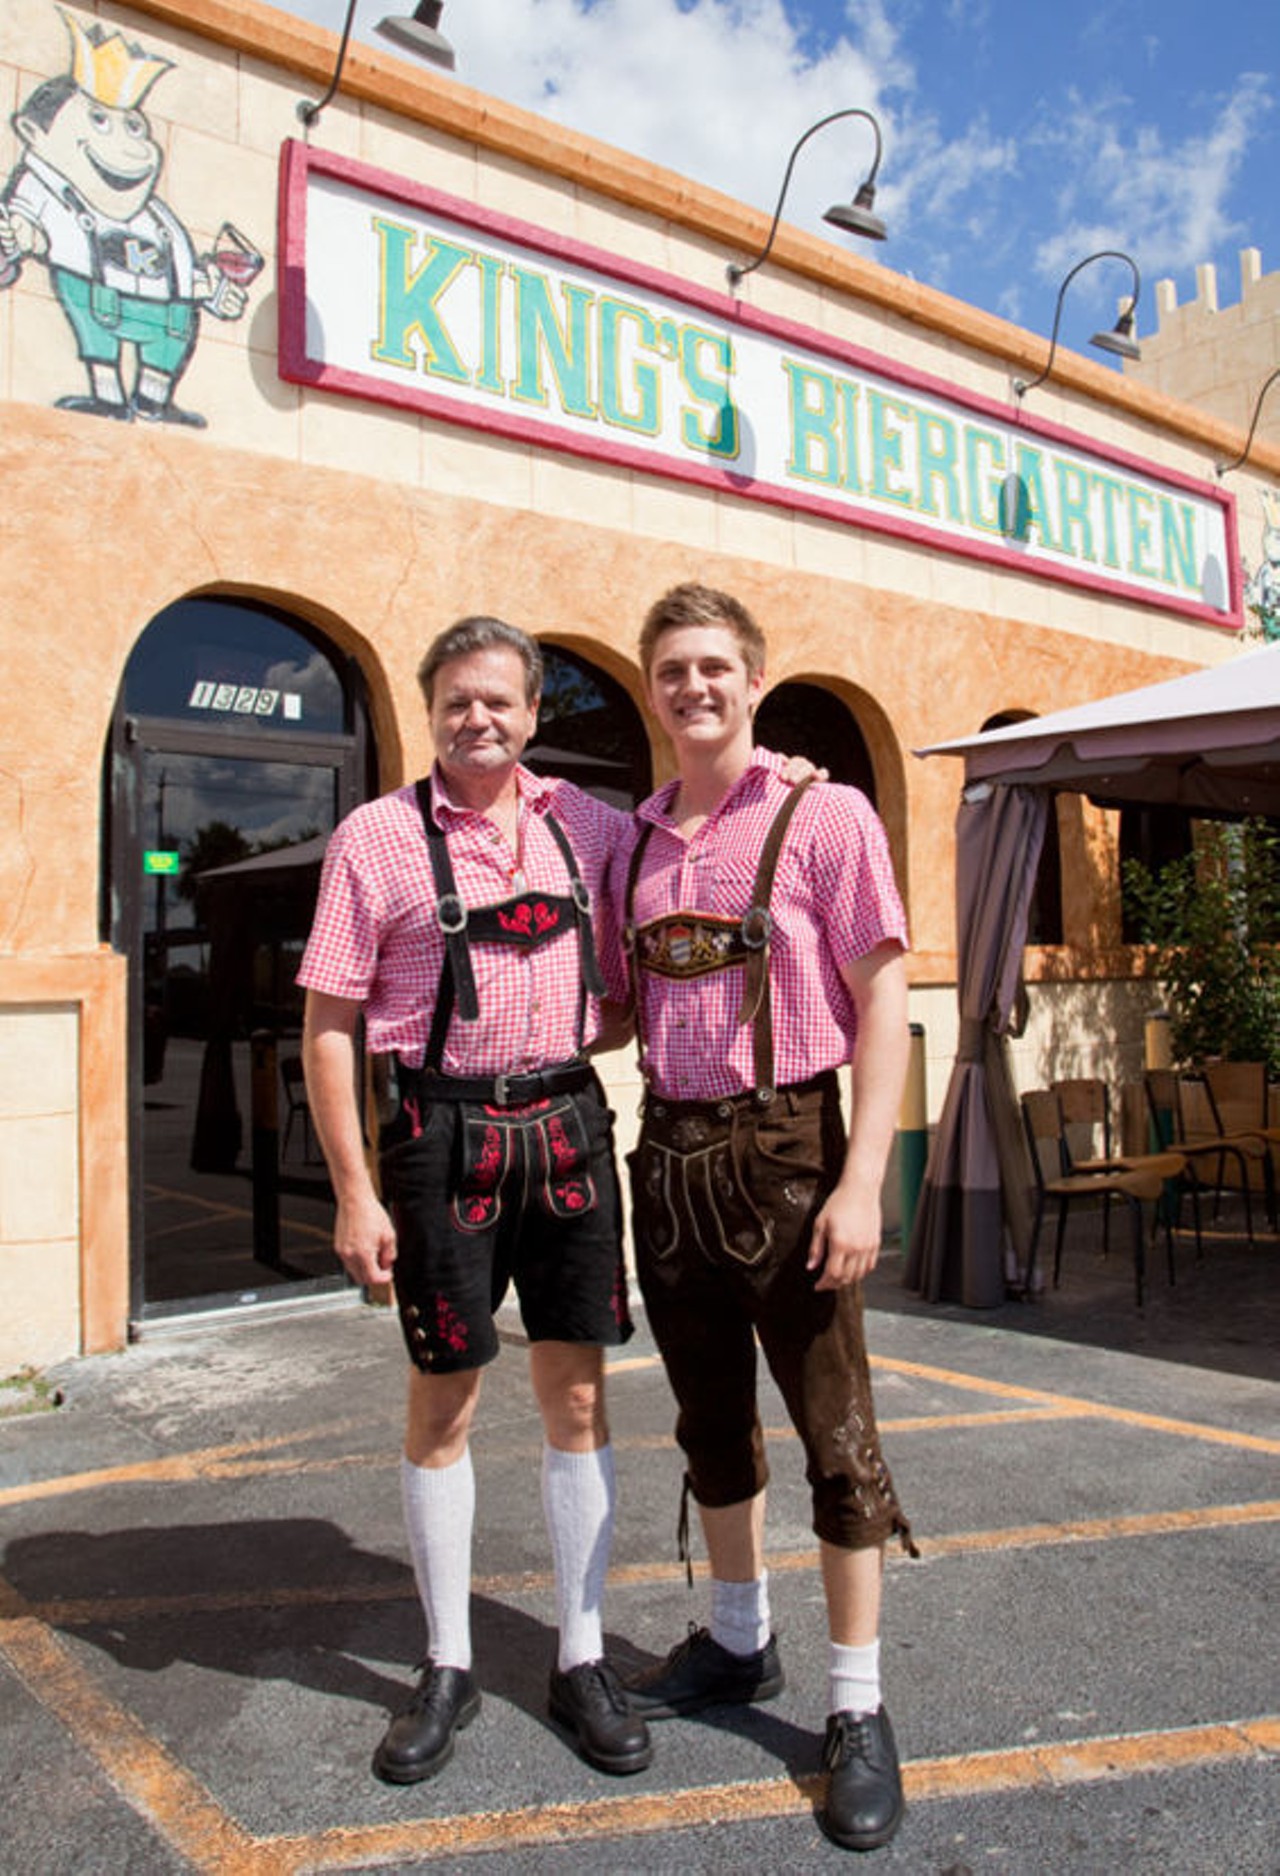 From the Celebrate Oktoberfest with King's Biergarten gallery, published by the Houston Press.